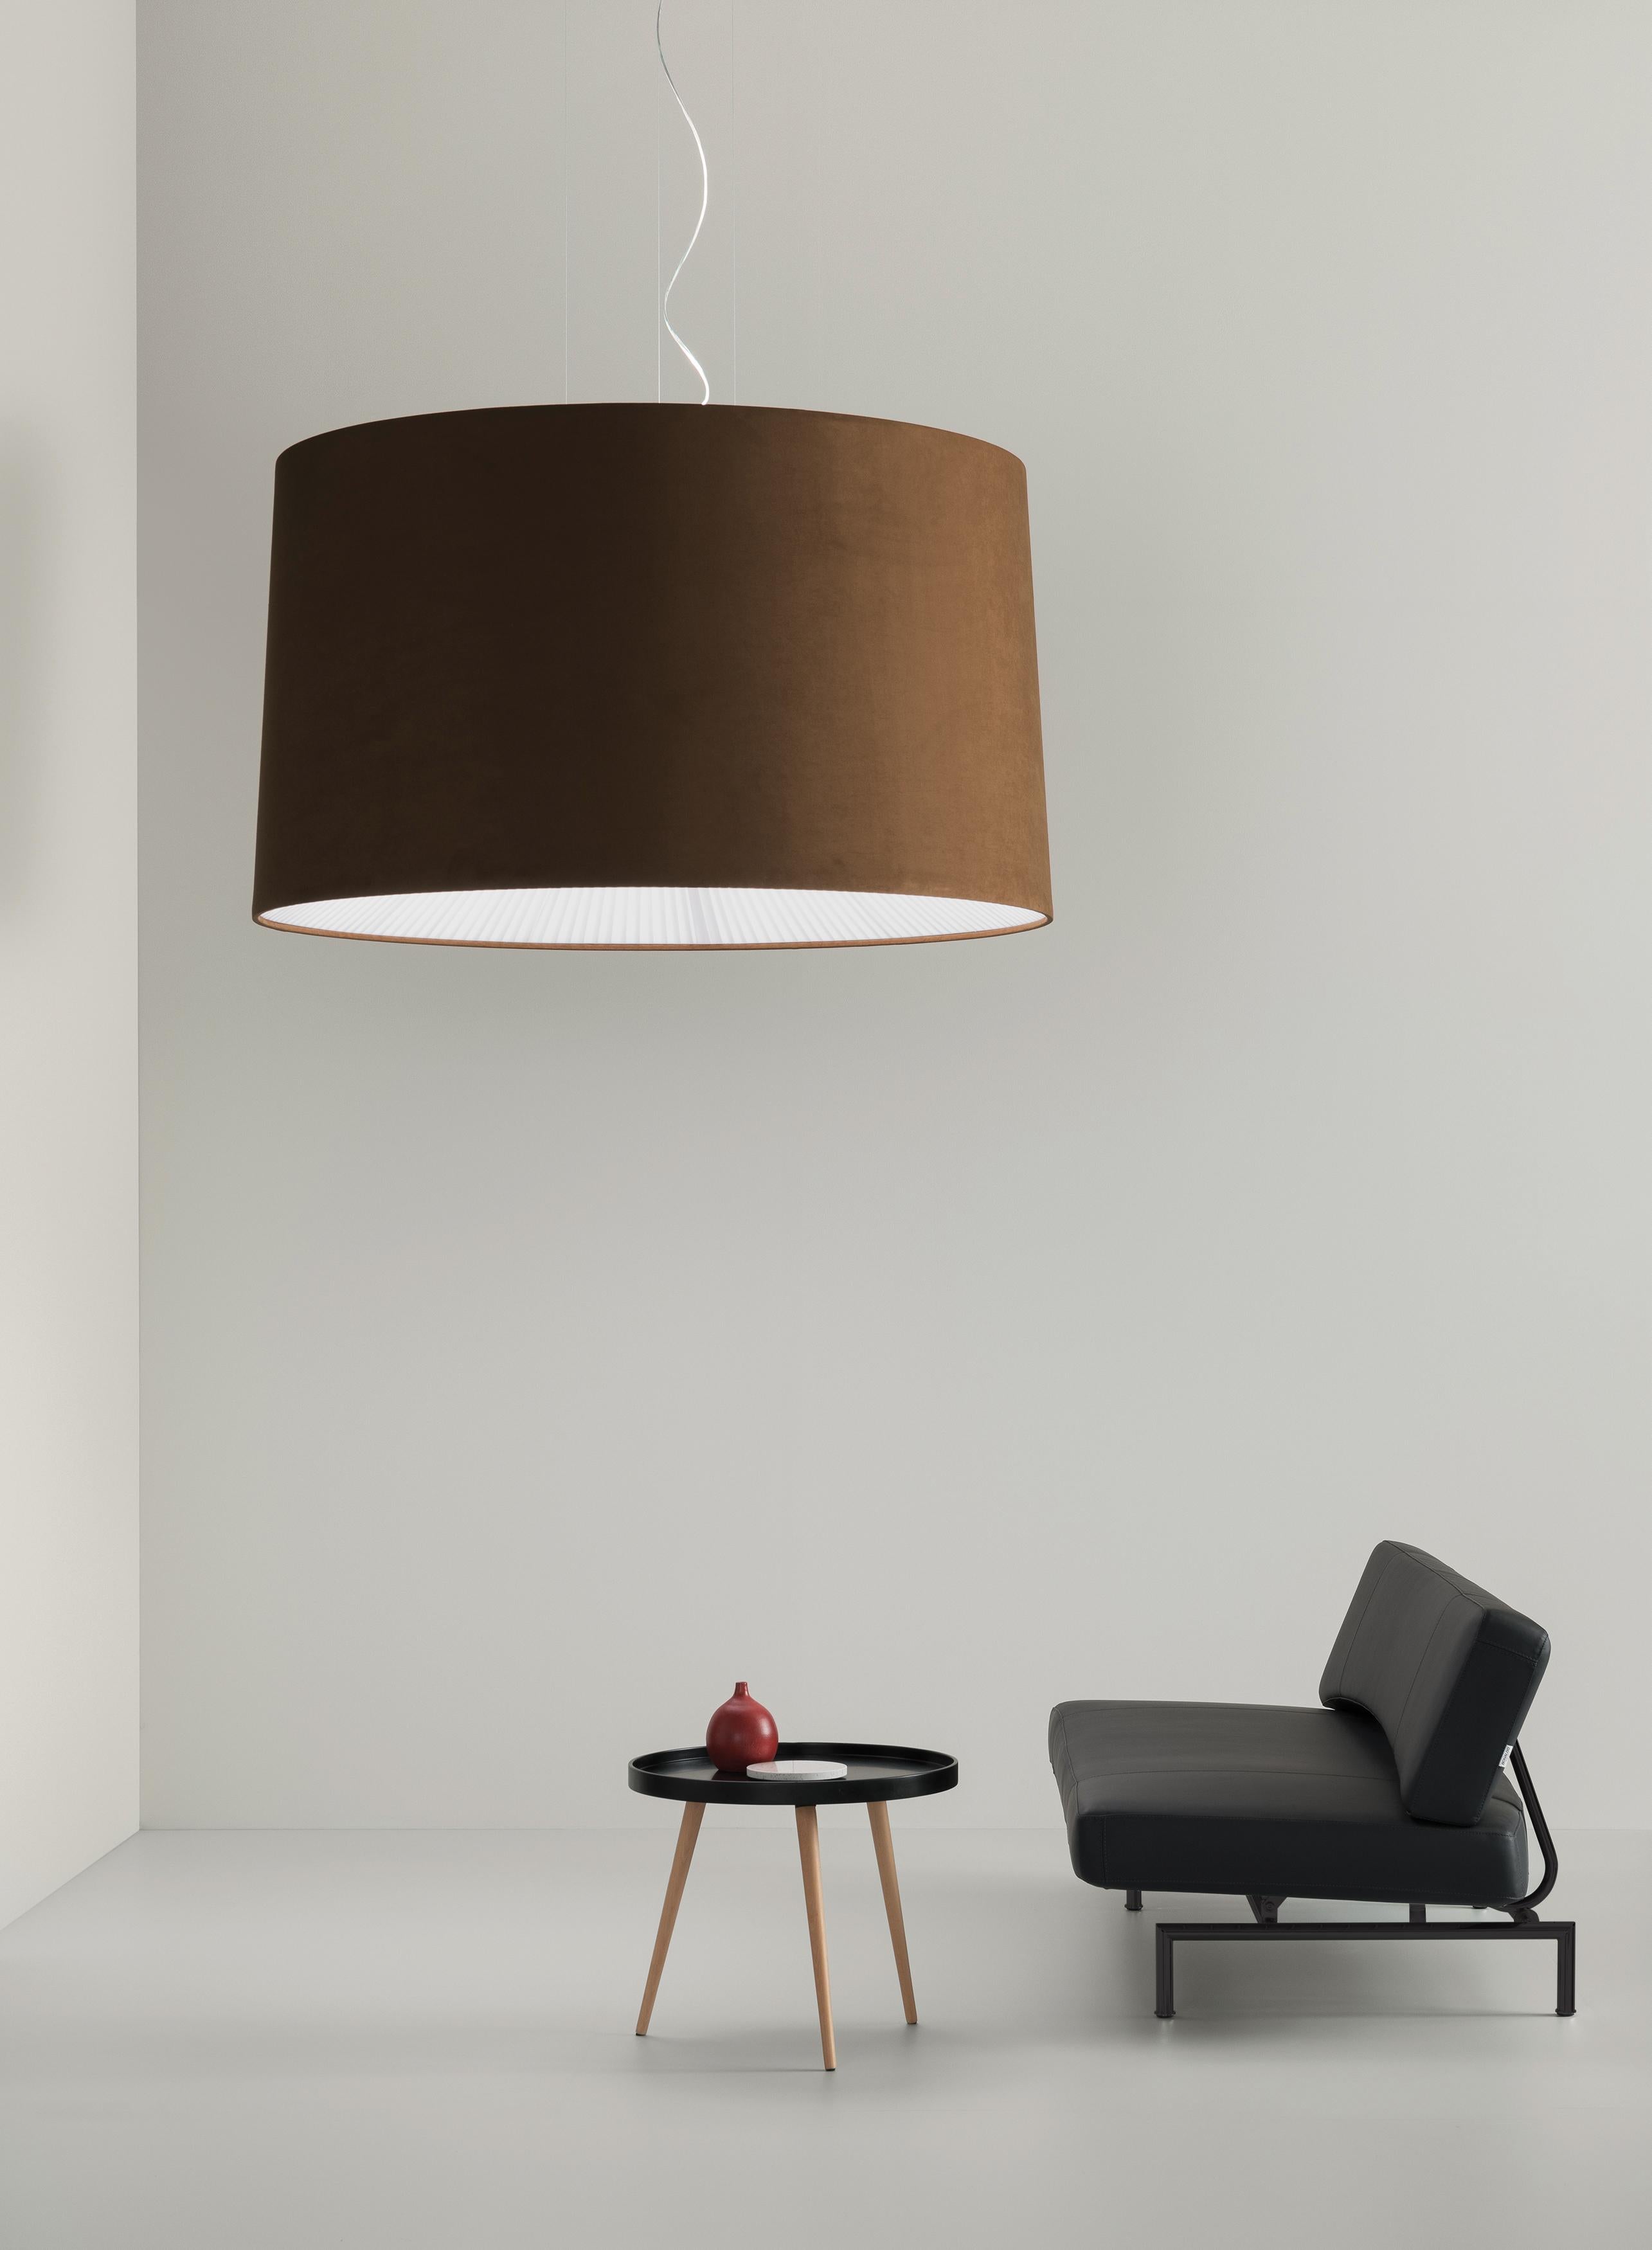 Axolight Medium Velvet Pendant Lamp in Ivory by Manuel & Vanessa Vivian

The essential geometry, combined with the velvet-like texture, give life to Velvet. A collection full of charm and timeless elegance. The simplicity of its timeless design, the